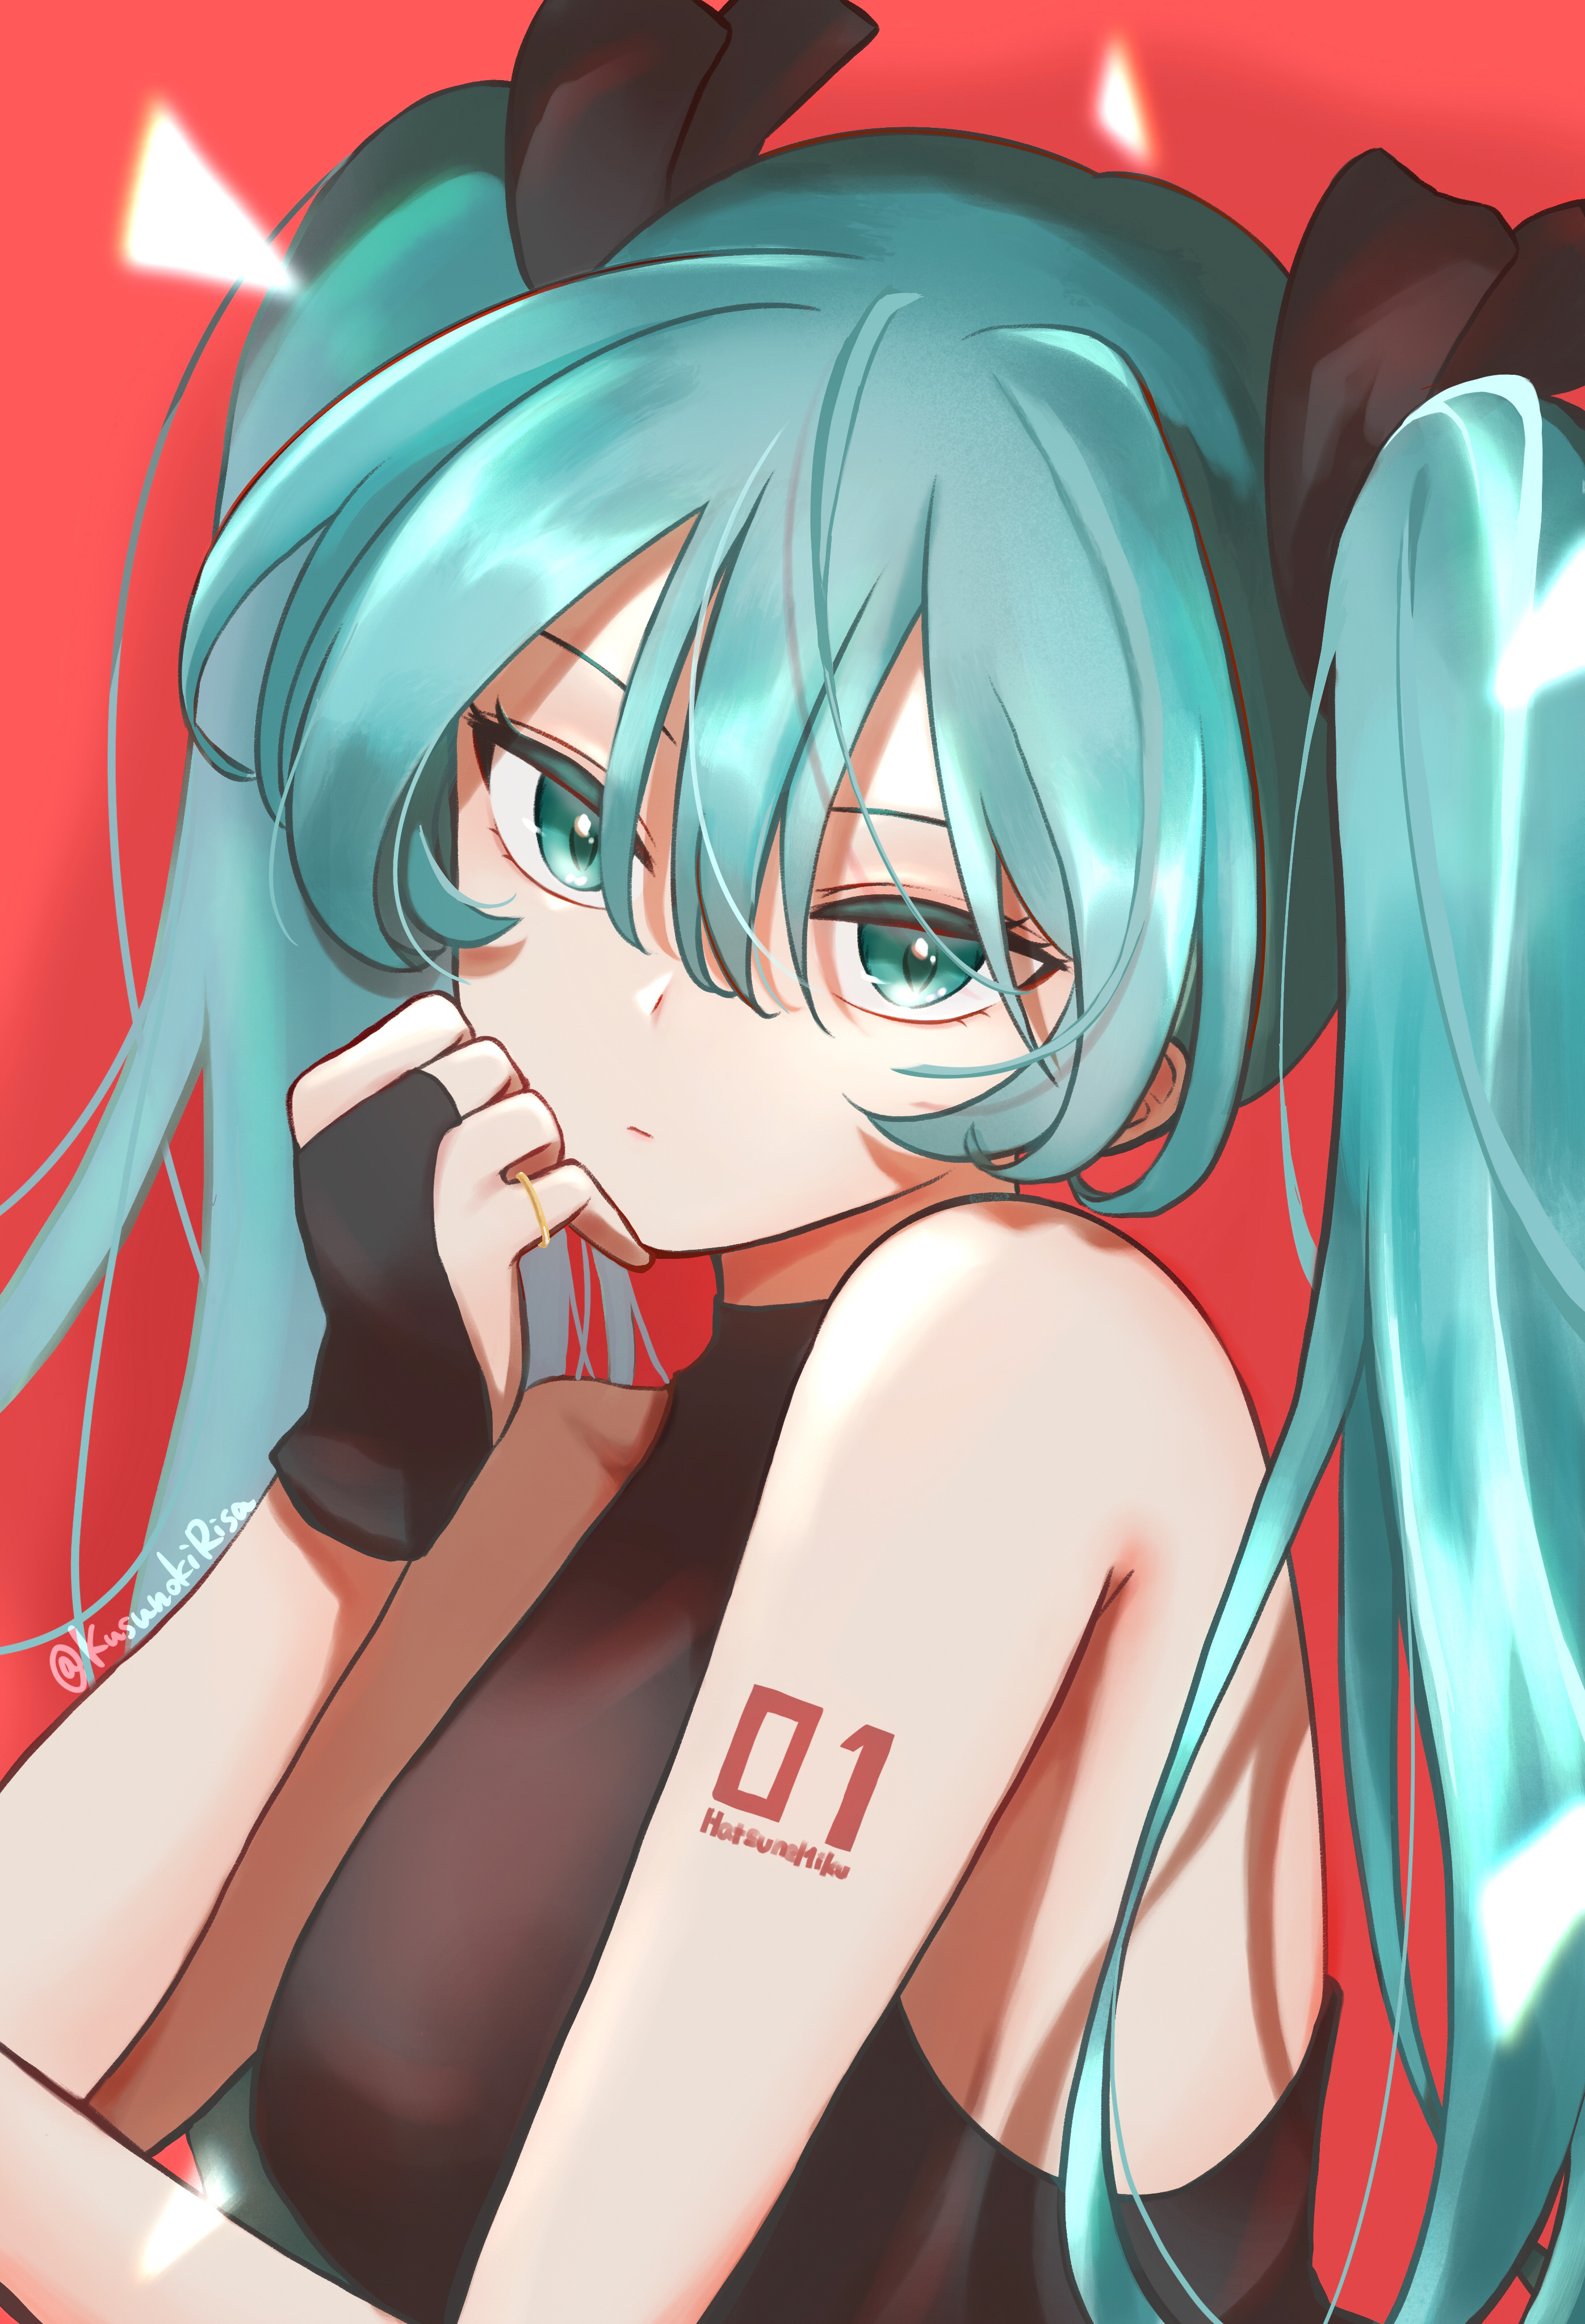 Buy Mick Miku  Hatsune Miku headphones leek 01  tattoo set hair  ornaments tool vocaloid cosplay Vocaloid Vocaloid Online at Low Prices  in India  Amazonin